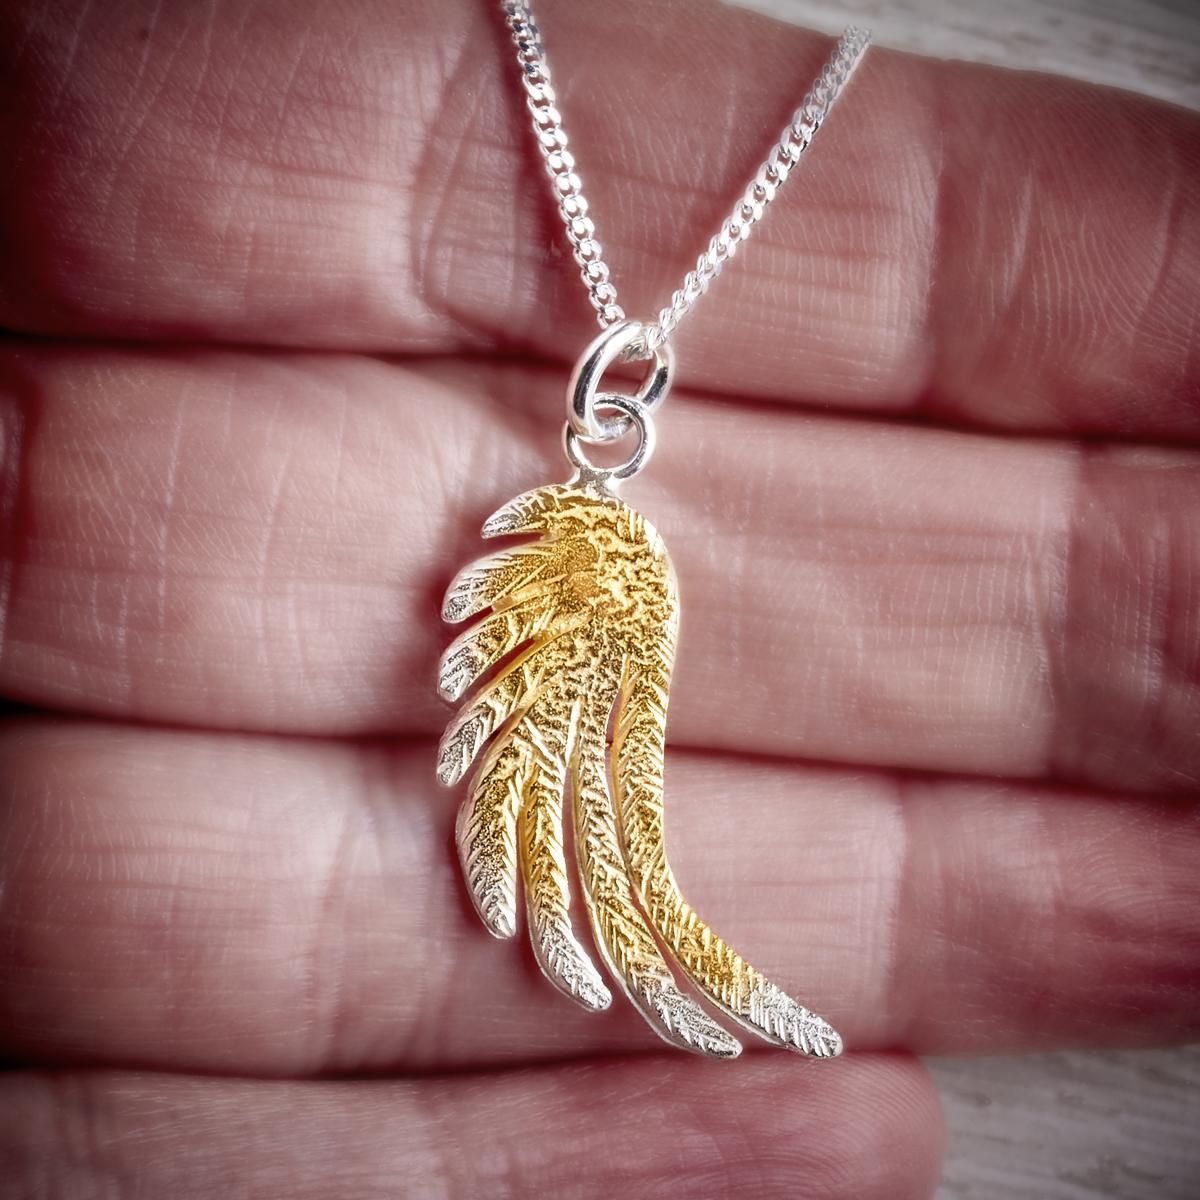 large silver and gold angel wings pendant by fi mehra available from THE JEWELLERY MAKERS, image property of EMMA WHITE-1